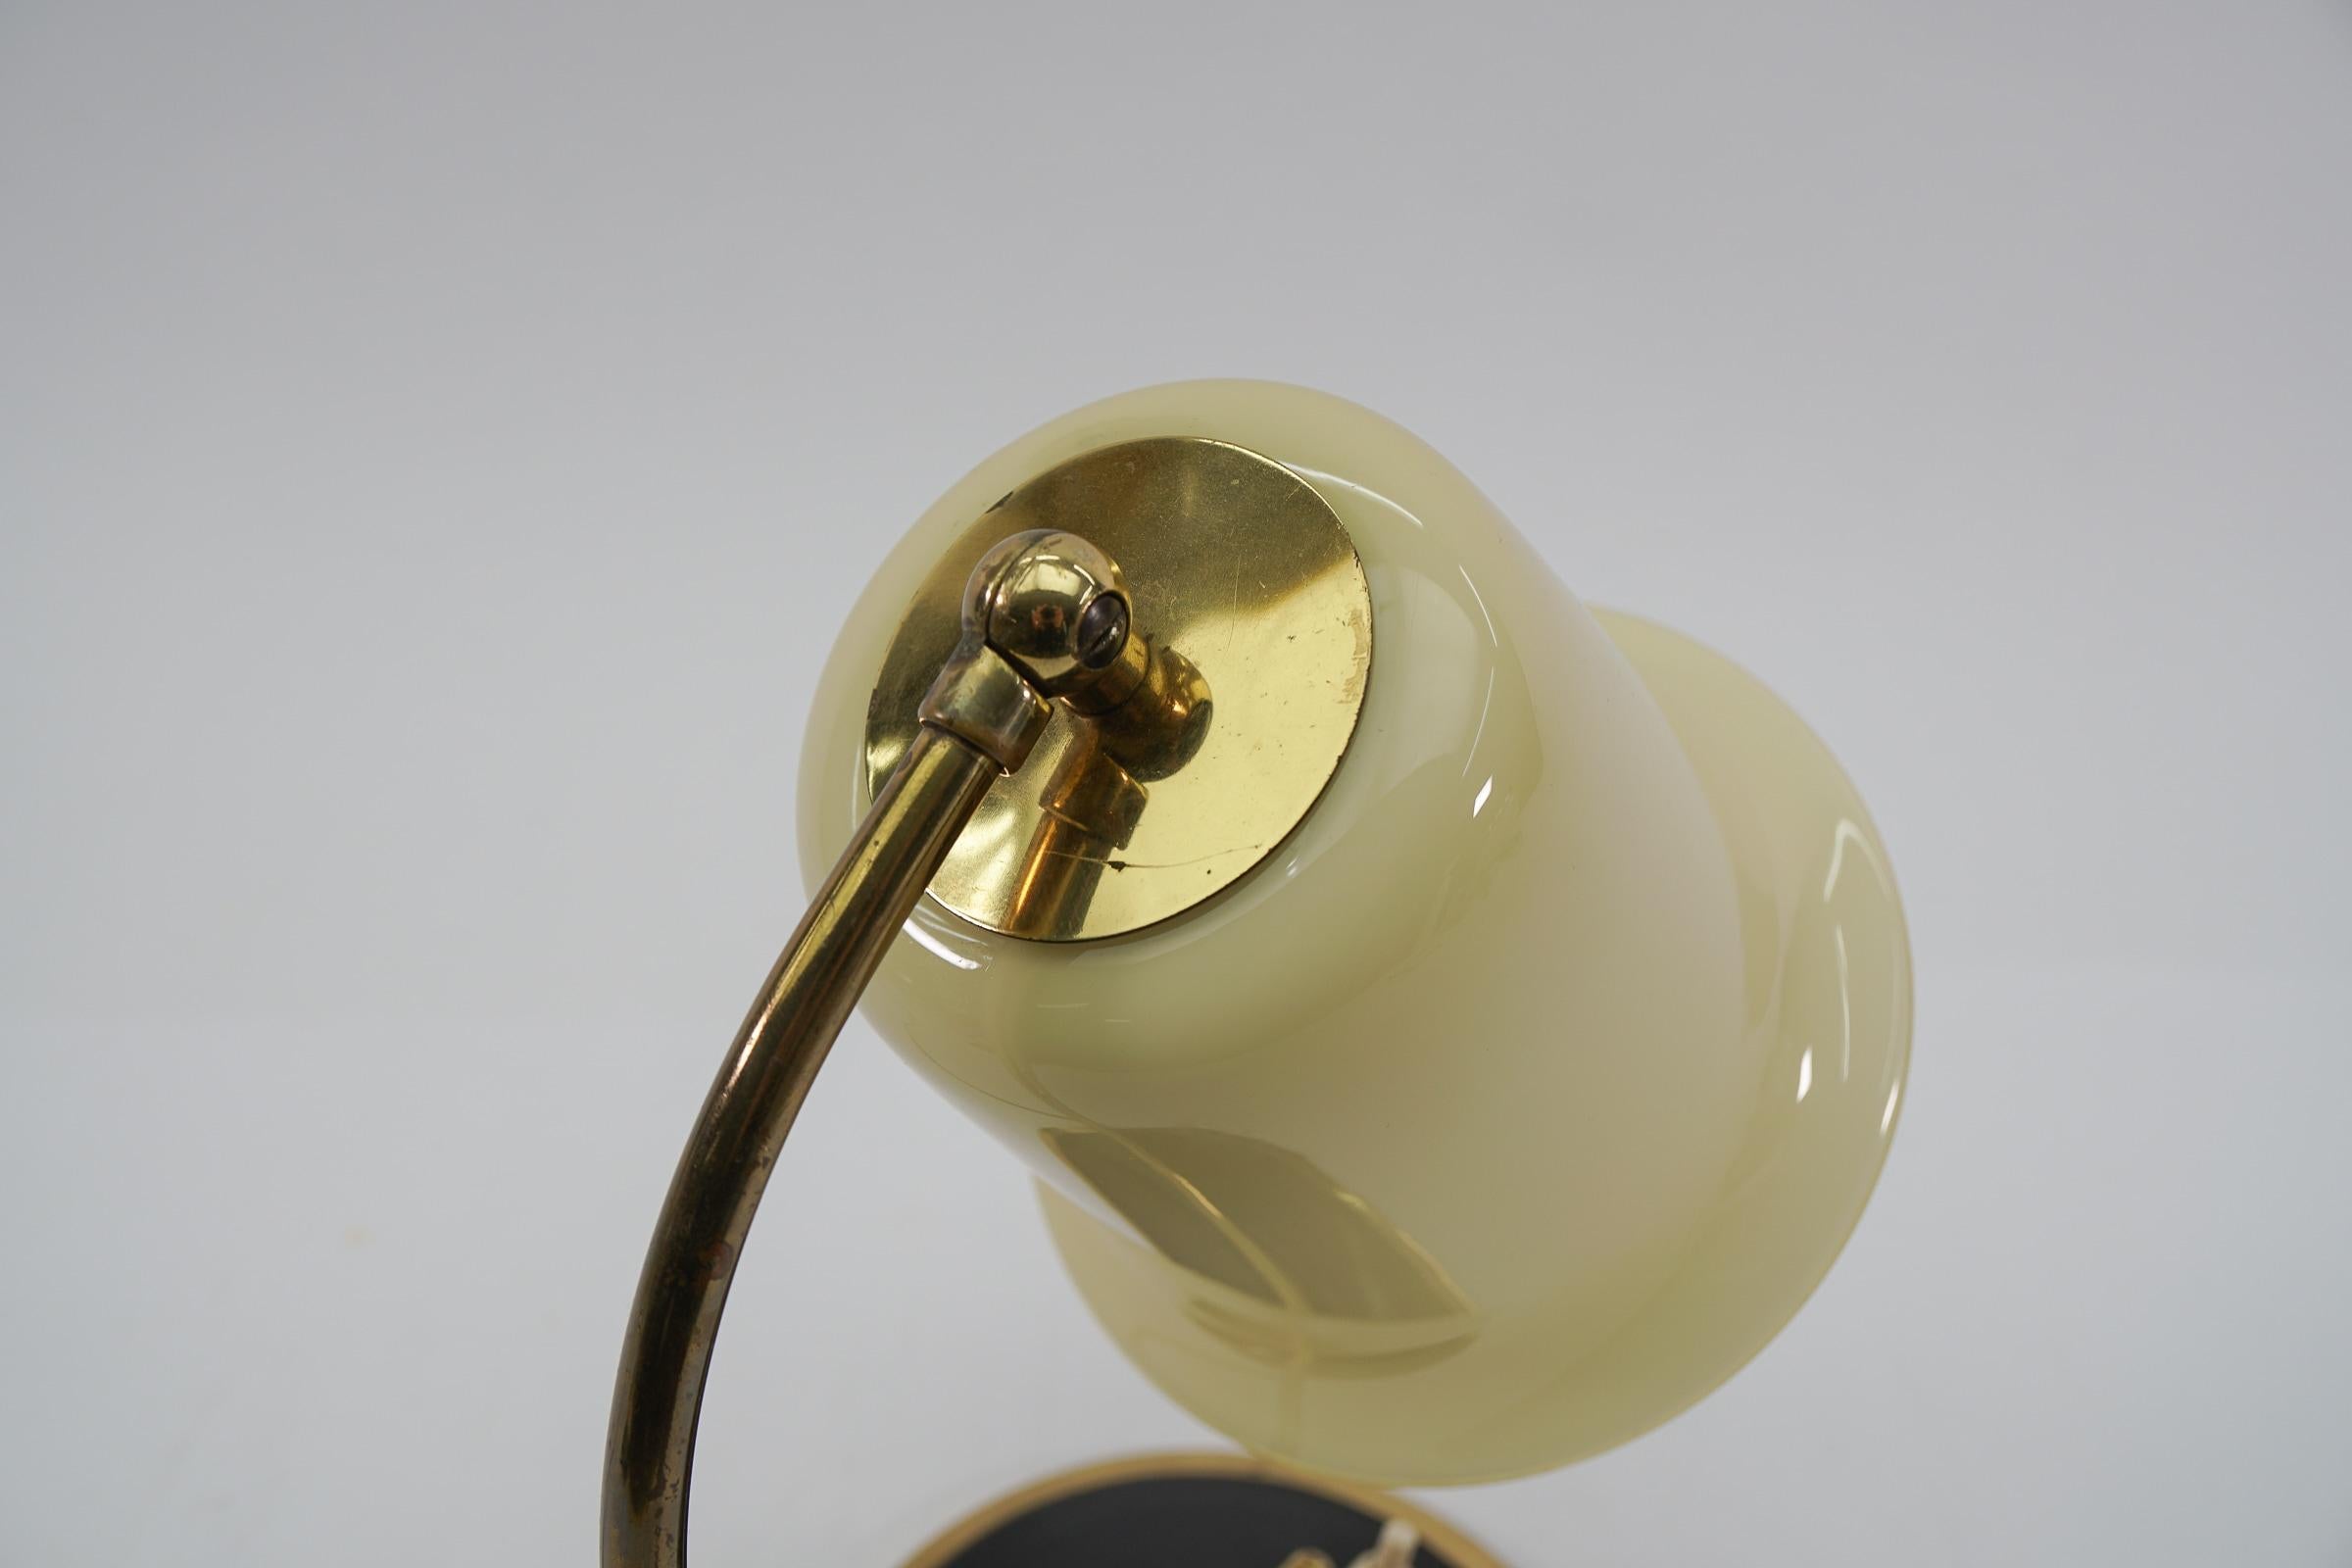 Lovely Midcentury Table Lampe Made in Glass and Brass, 1950s, Austria For Sale 3